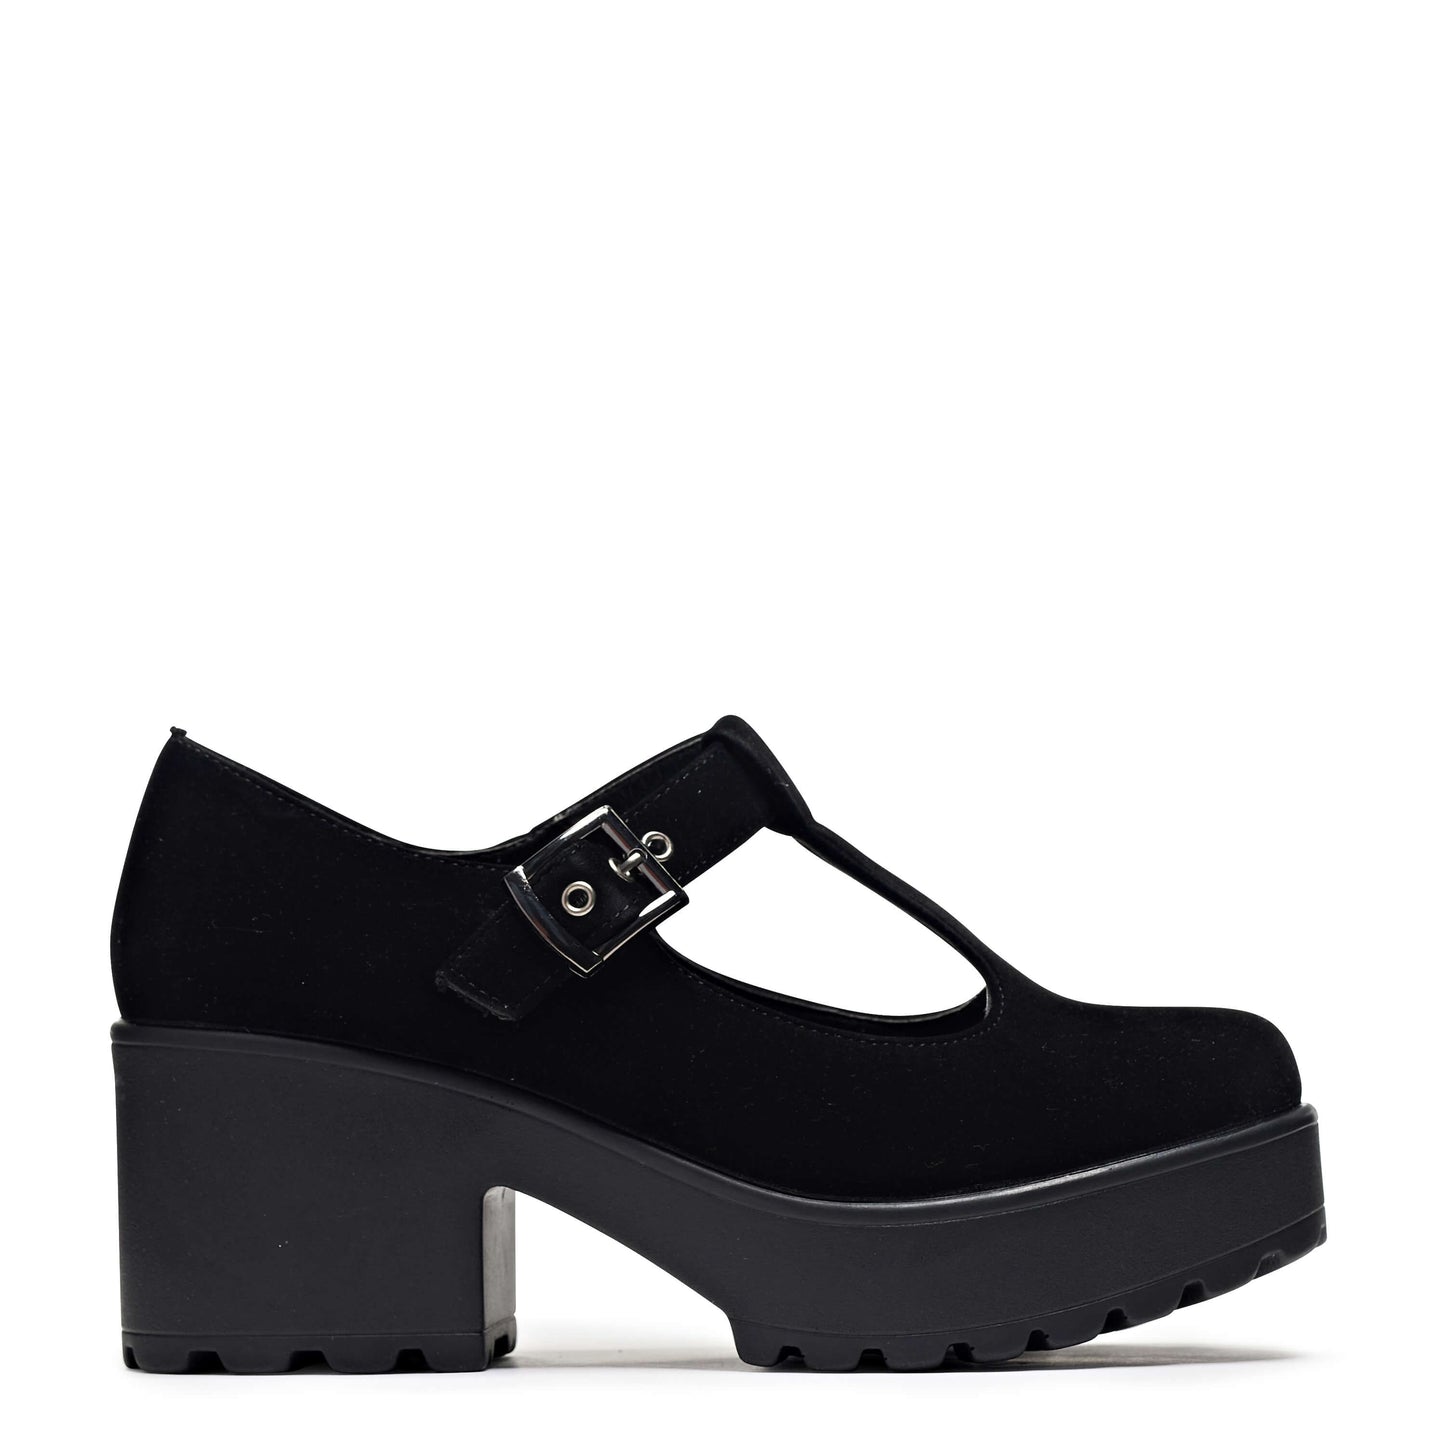 Sai Black Mary Jane Shoes 'Suede Edition' - Mary Janes - KOI Footwear - Black - Side View